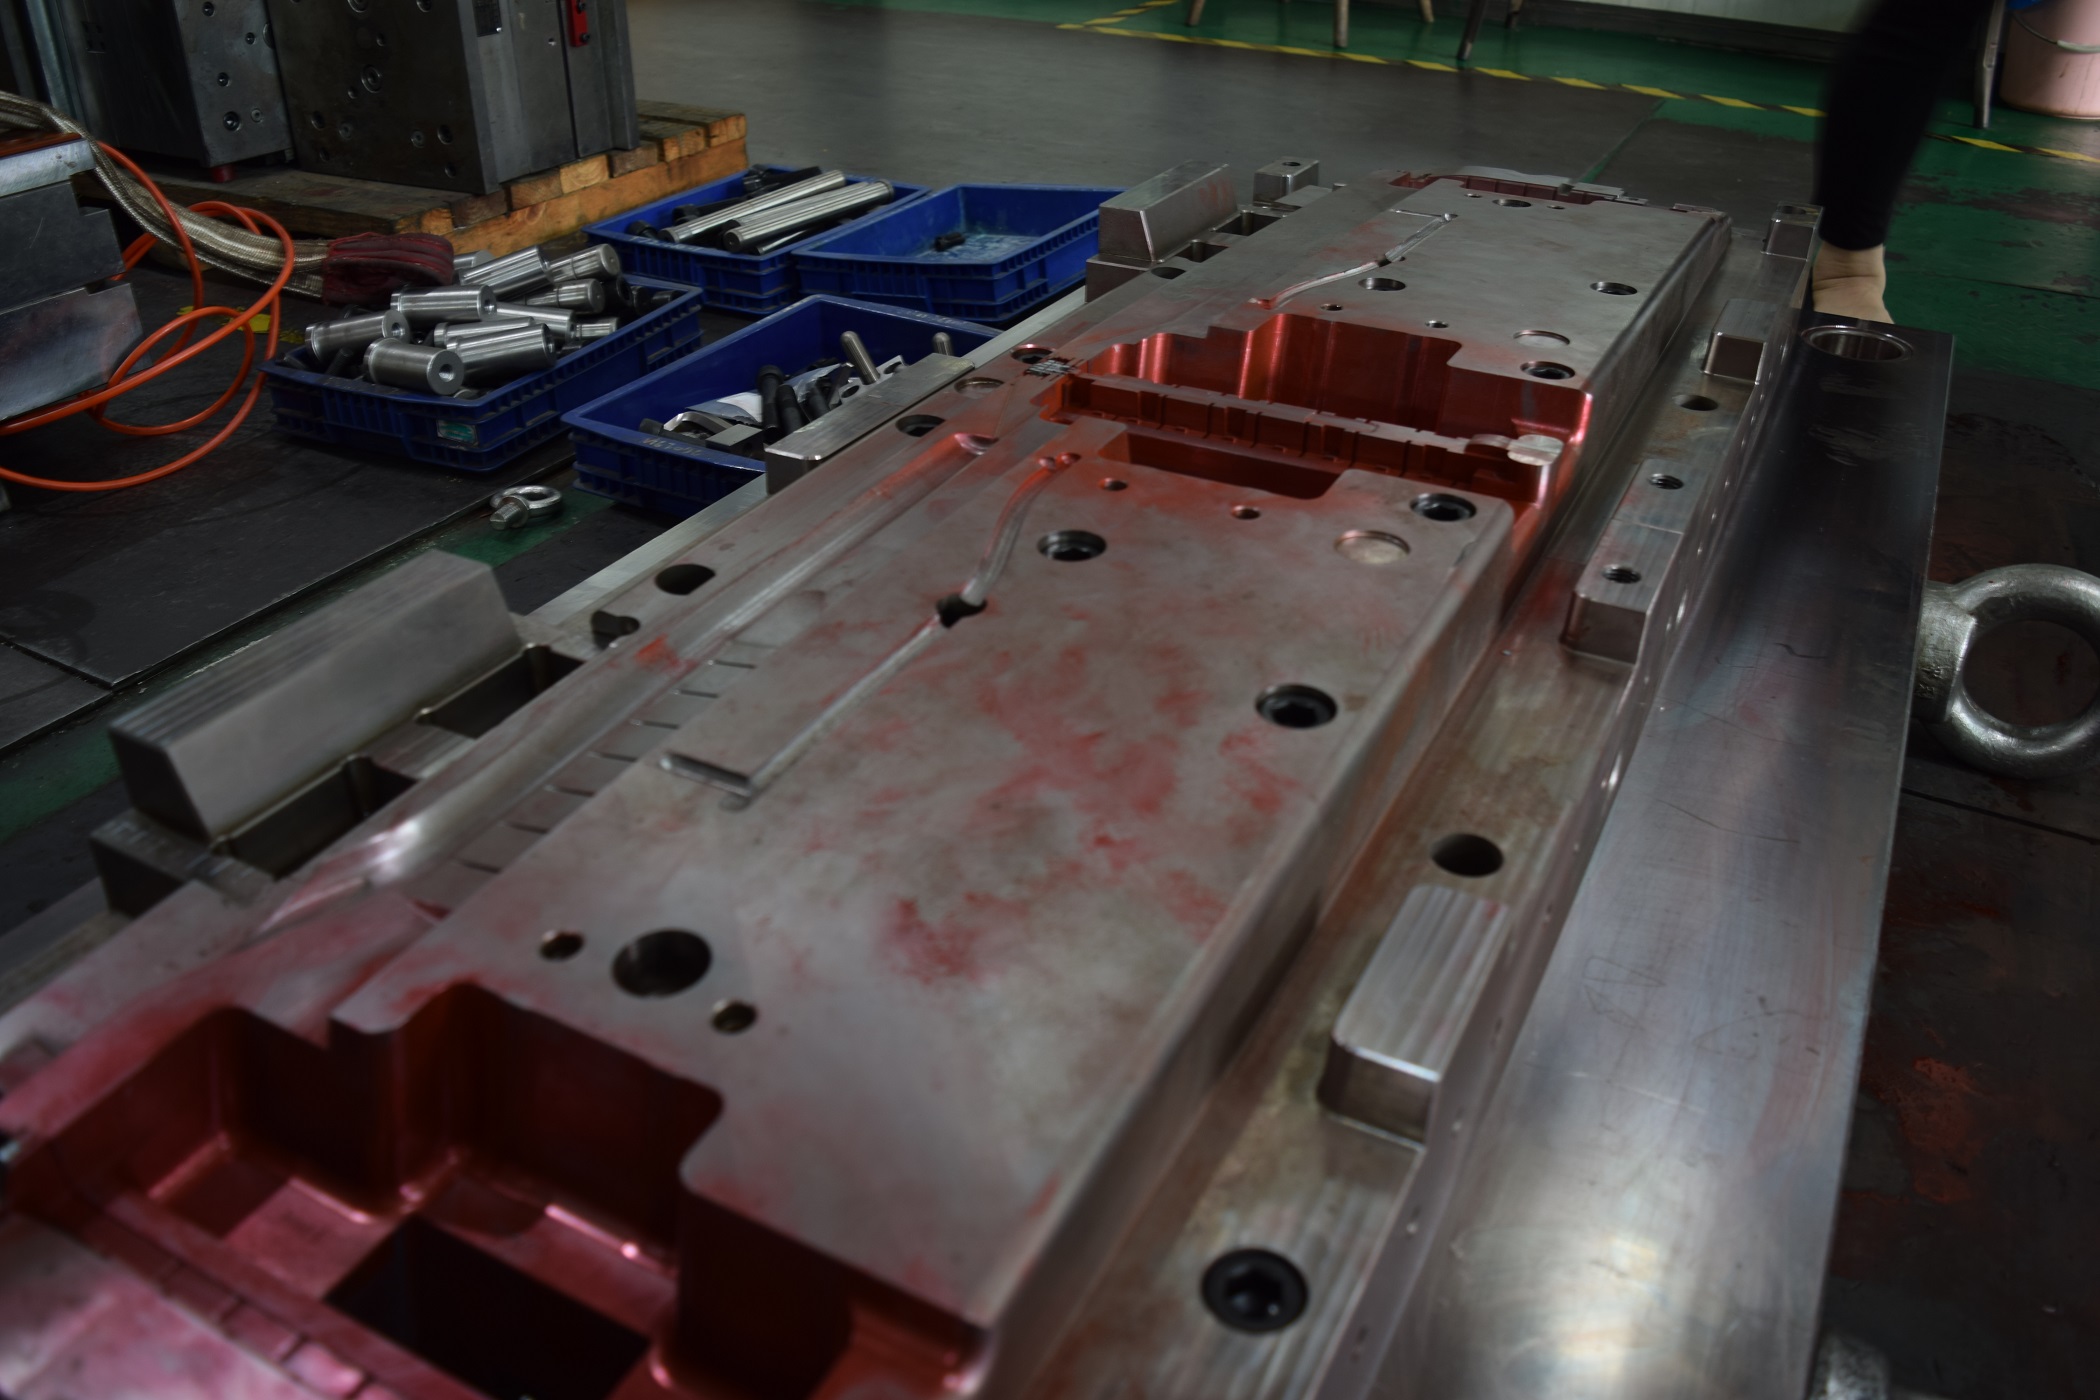 Large injection molding part